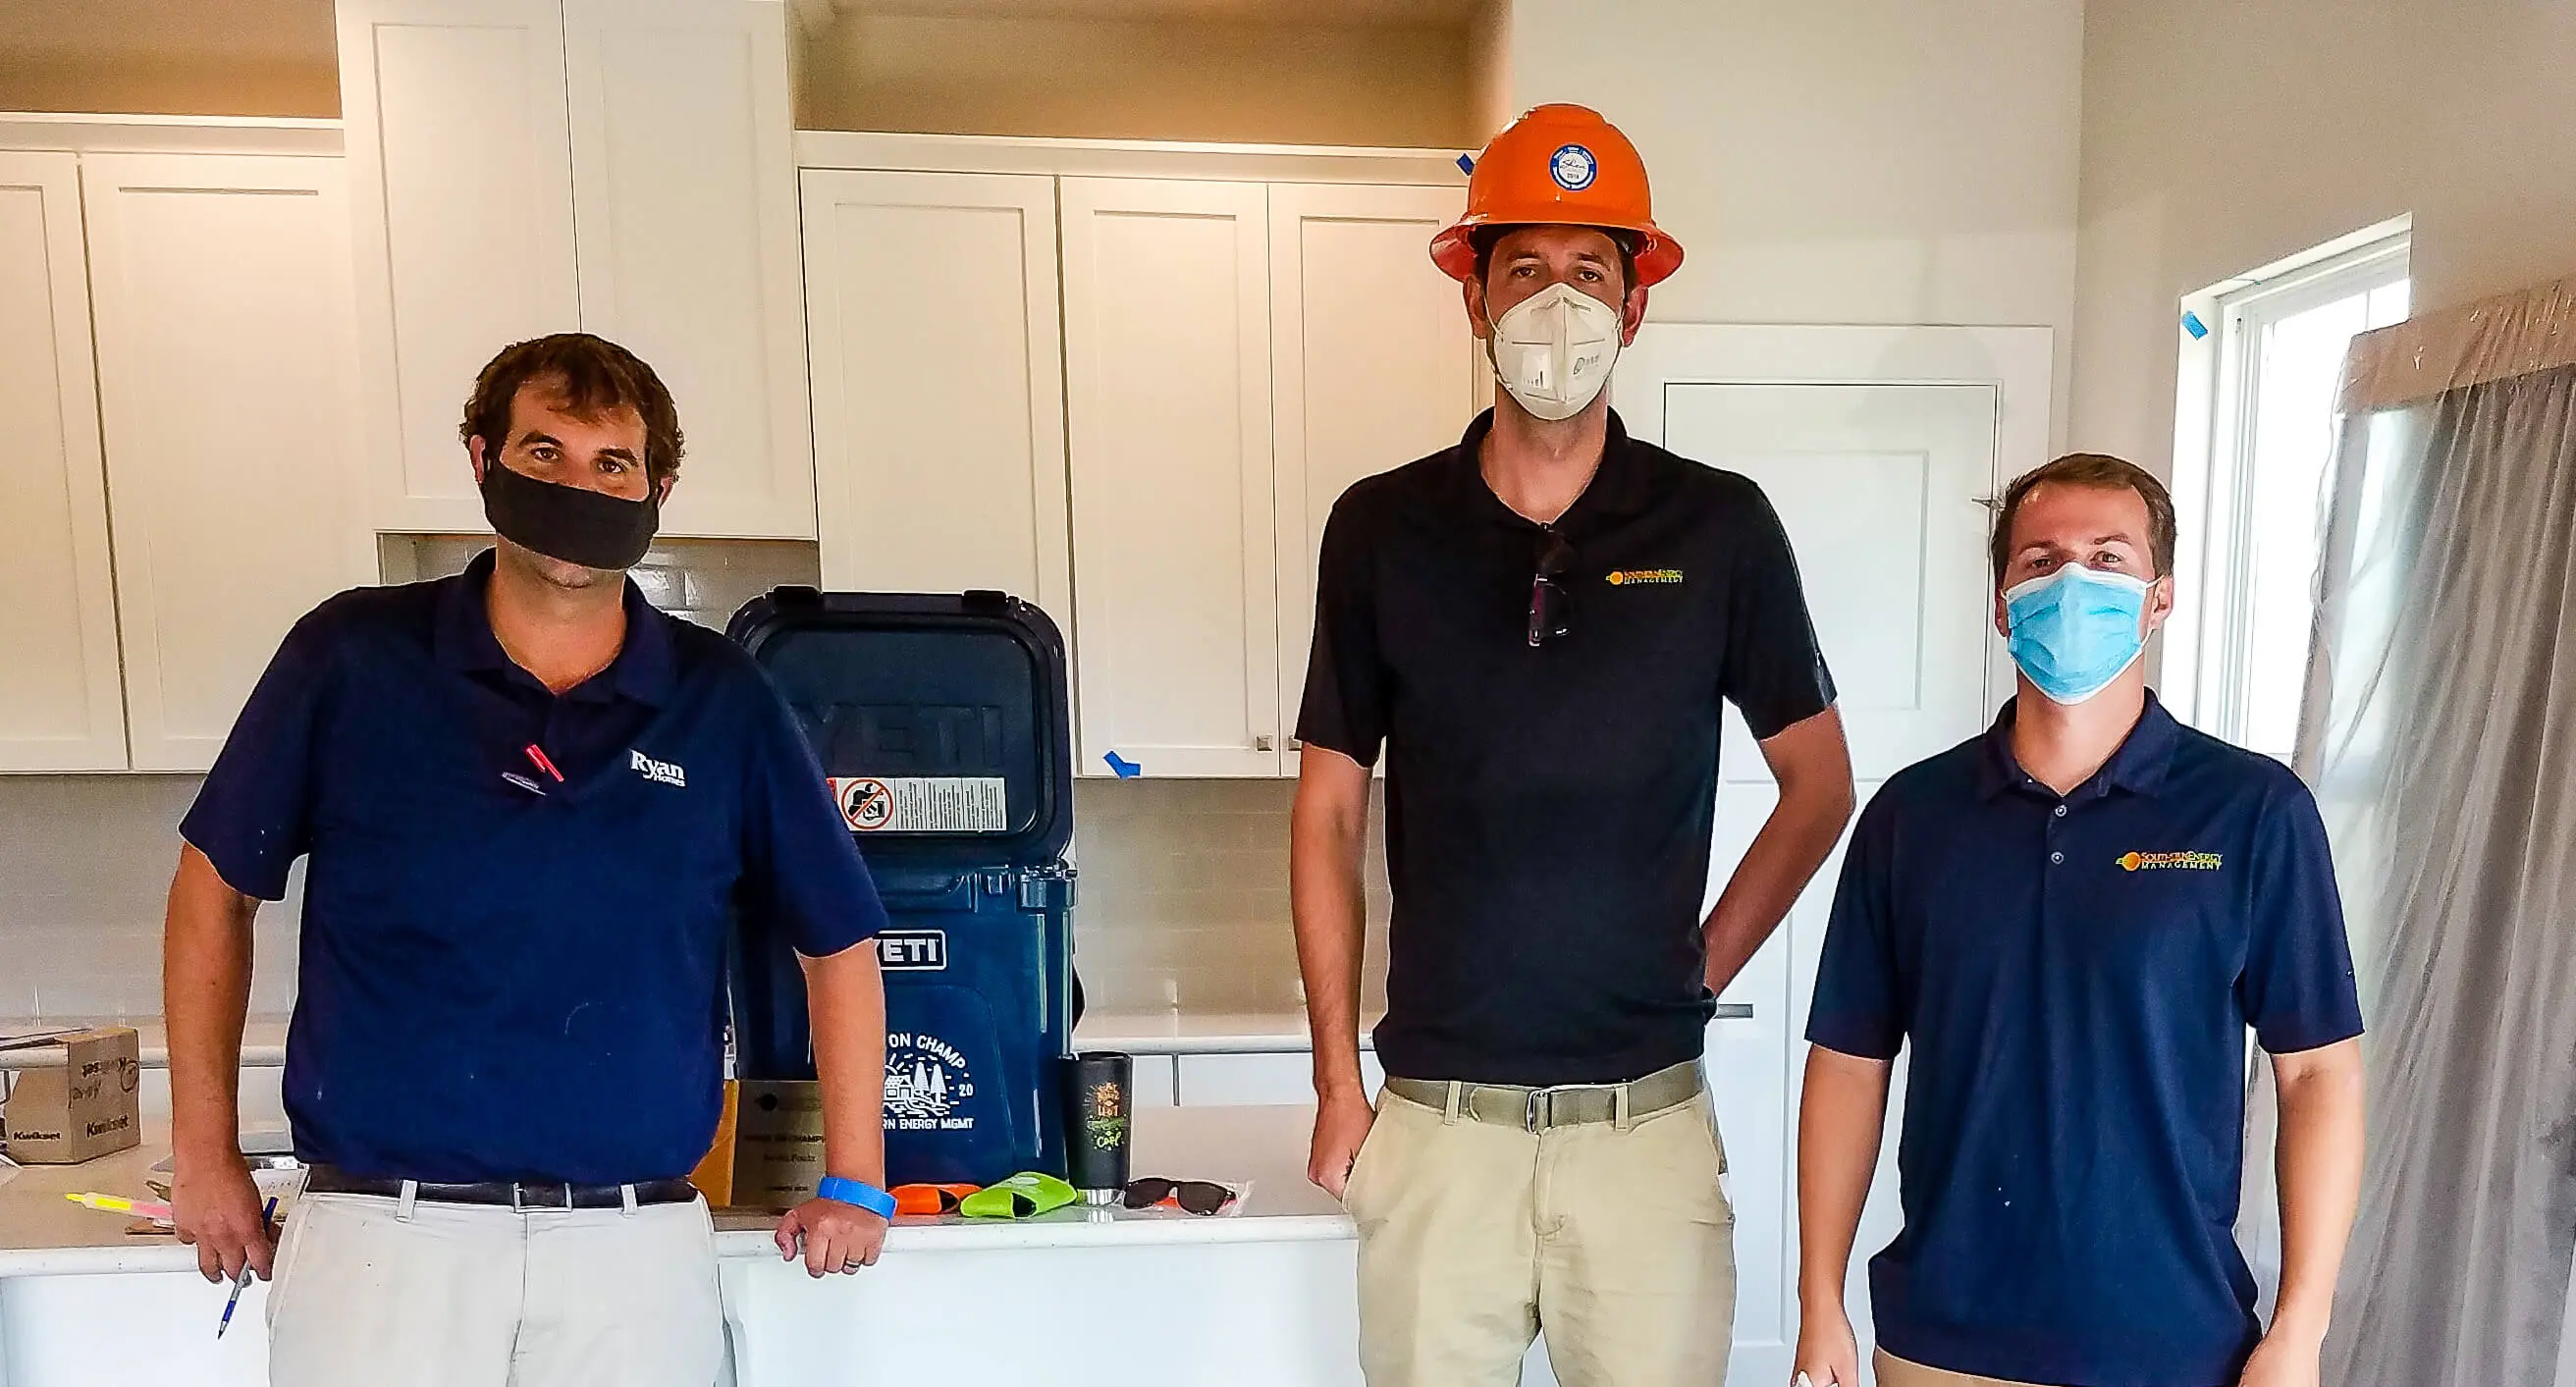 Kevin Foutz, Summer 2020 Shine On Champion, with the Southern Energy Management Team